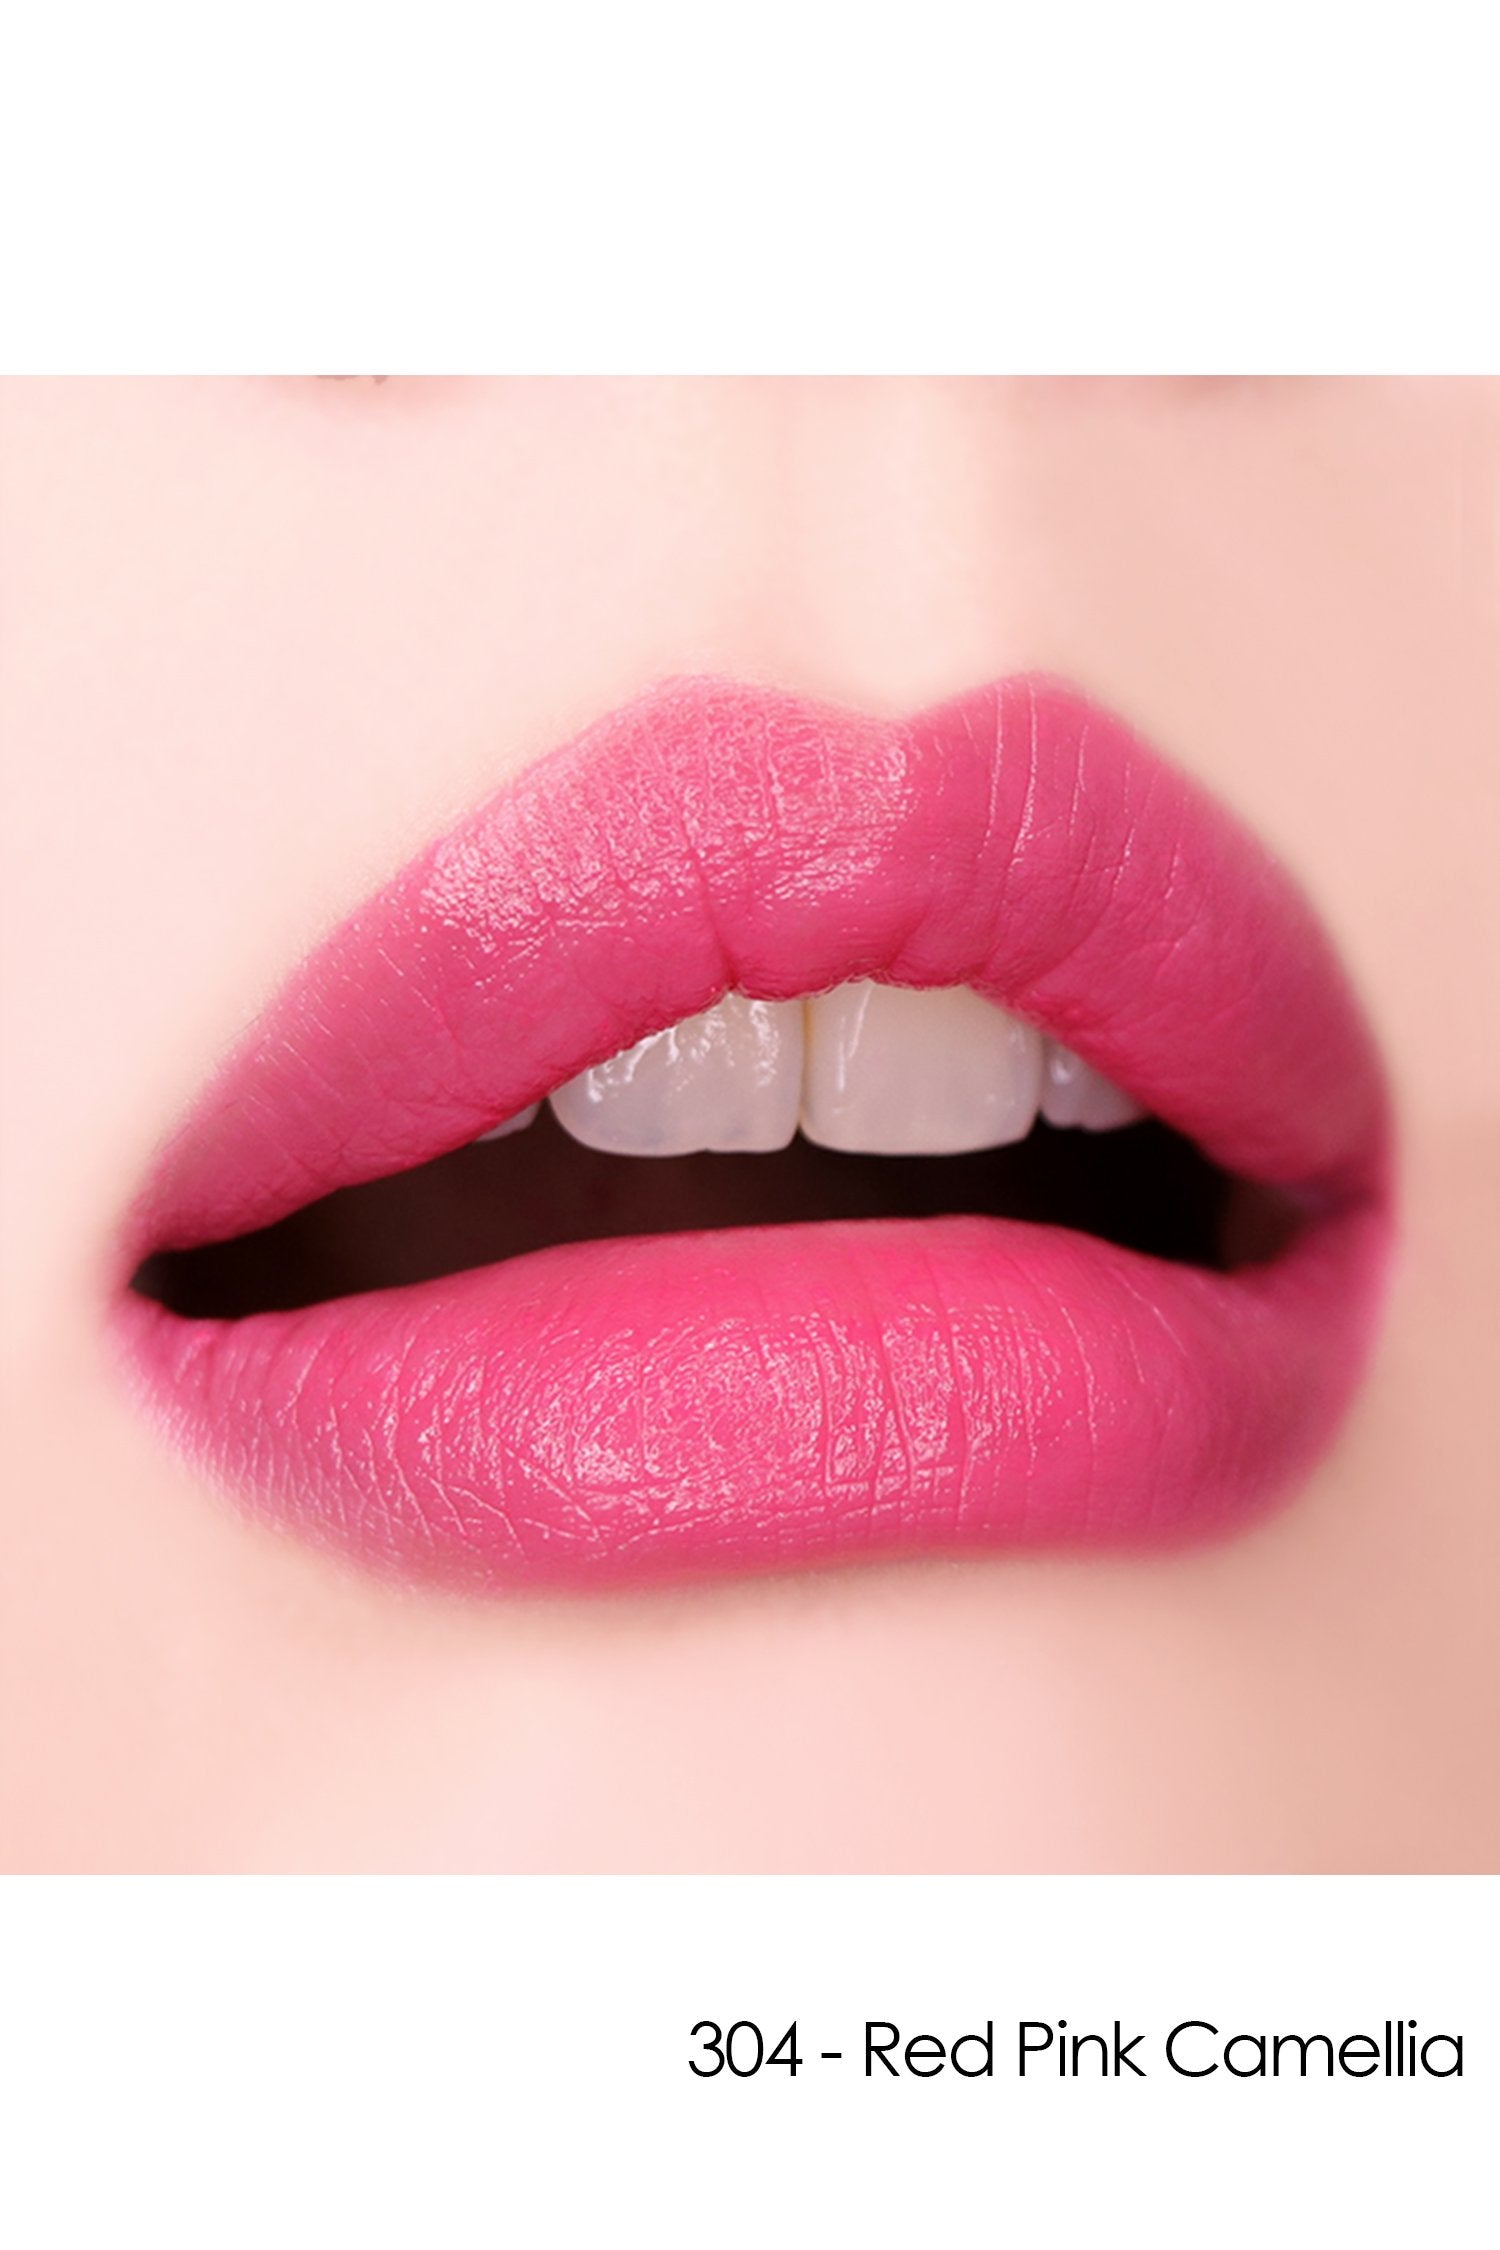 Lips with Lipstick F: Fairy Flower 304 - Red Pink Camellia